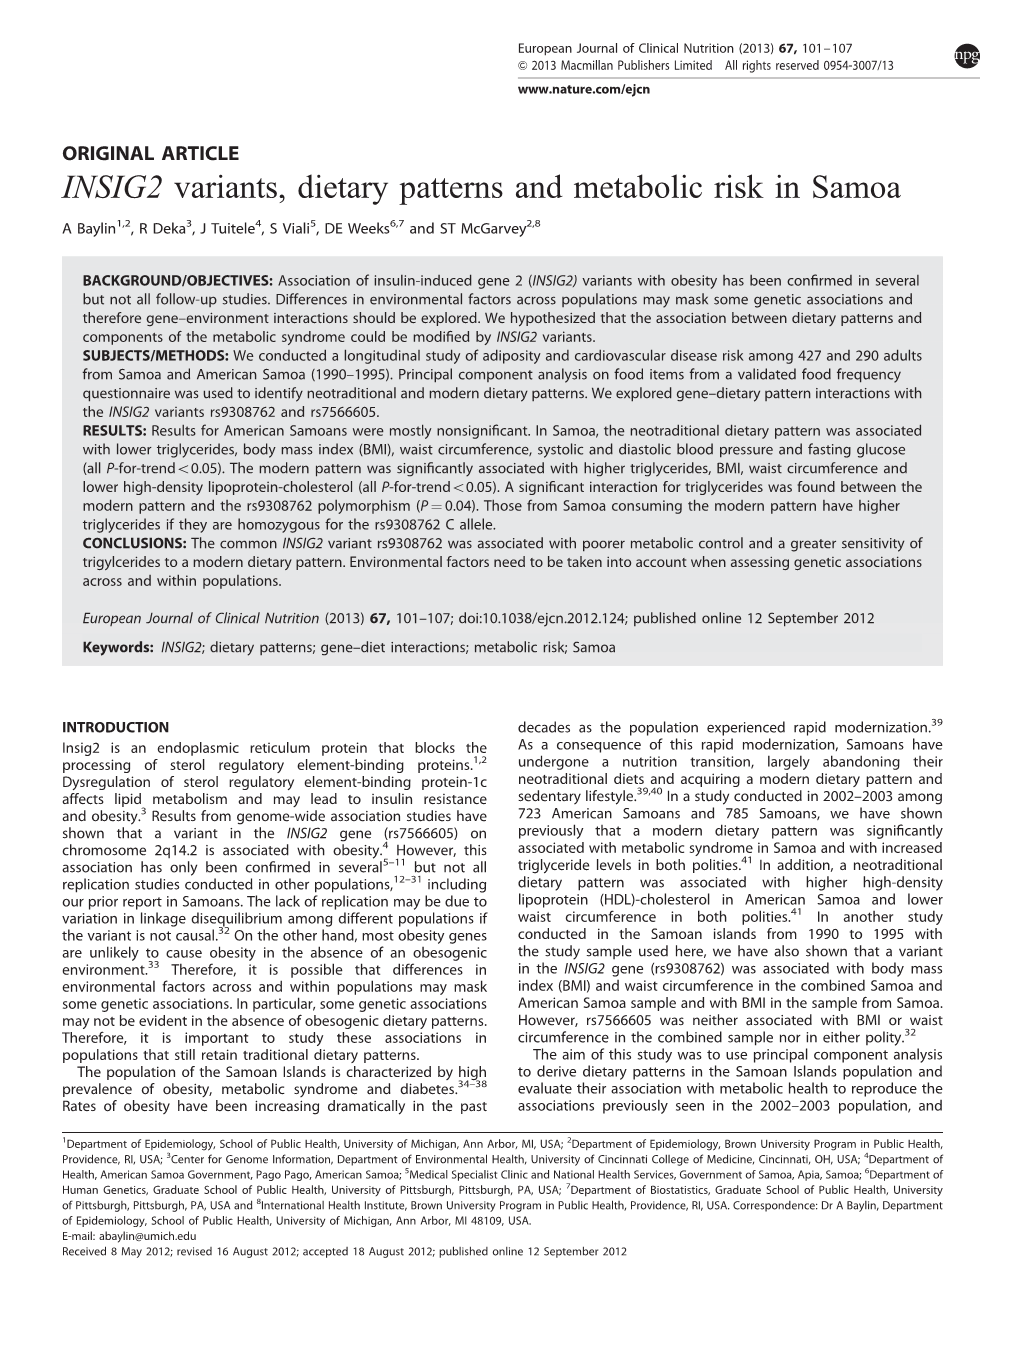 INSIG2 Variants, Dietary Patterns and Metabolic Risk in Samoa